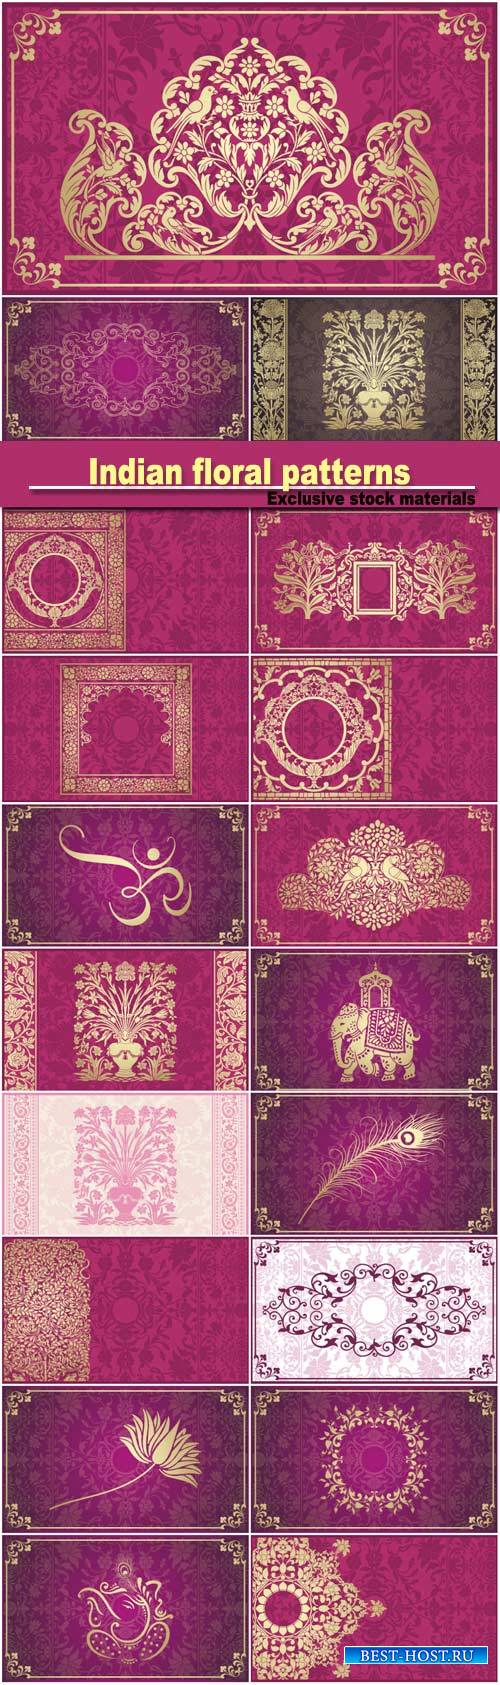 Indian floral patterns, vector backgrounds